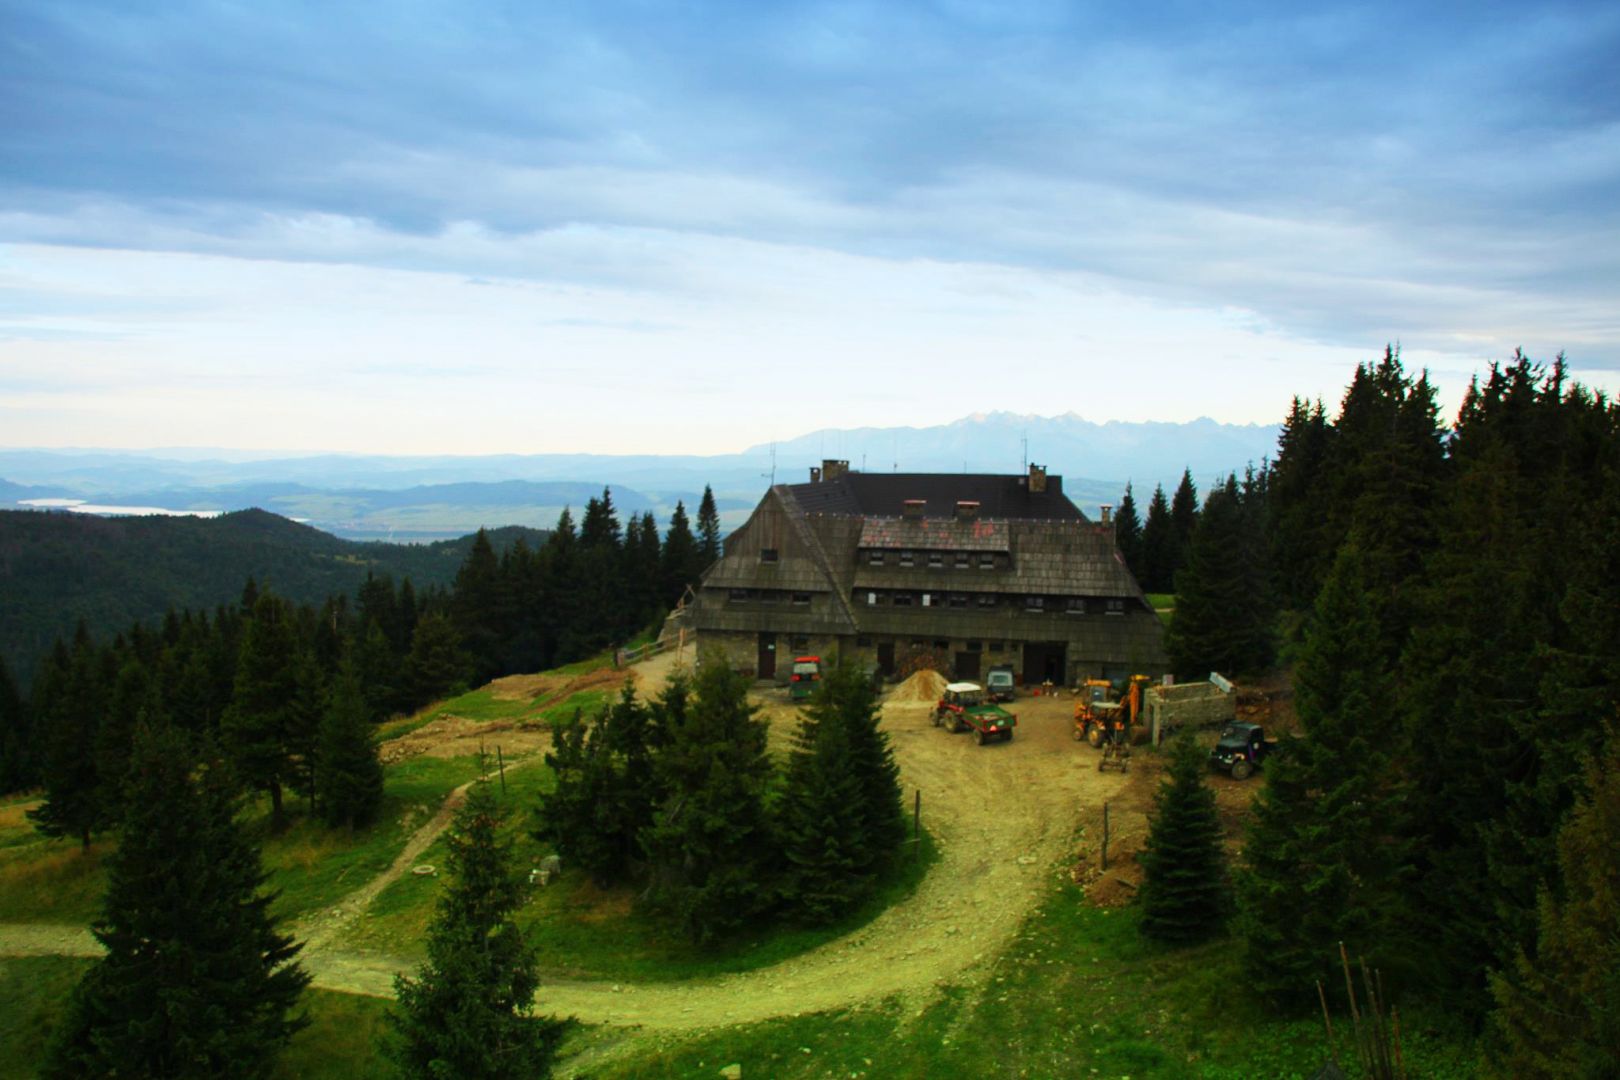 Hostel in Turbacz with a view of the Tatra Mountains